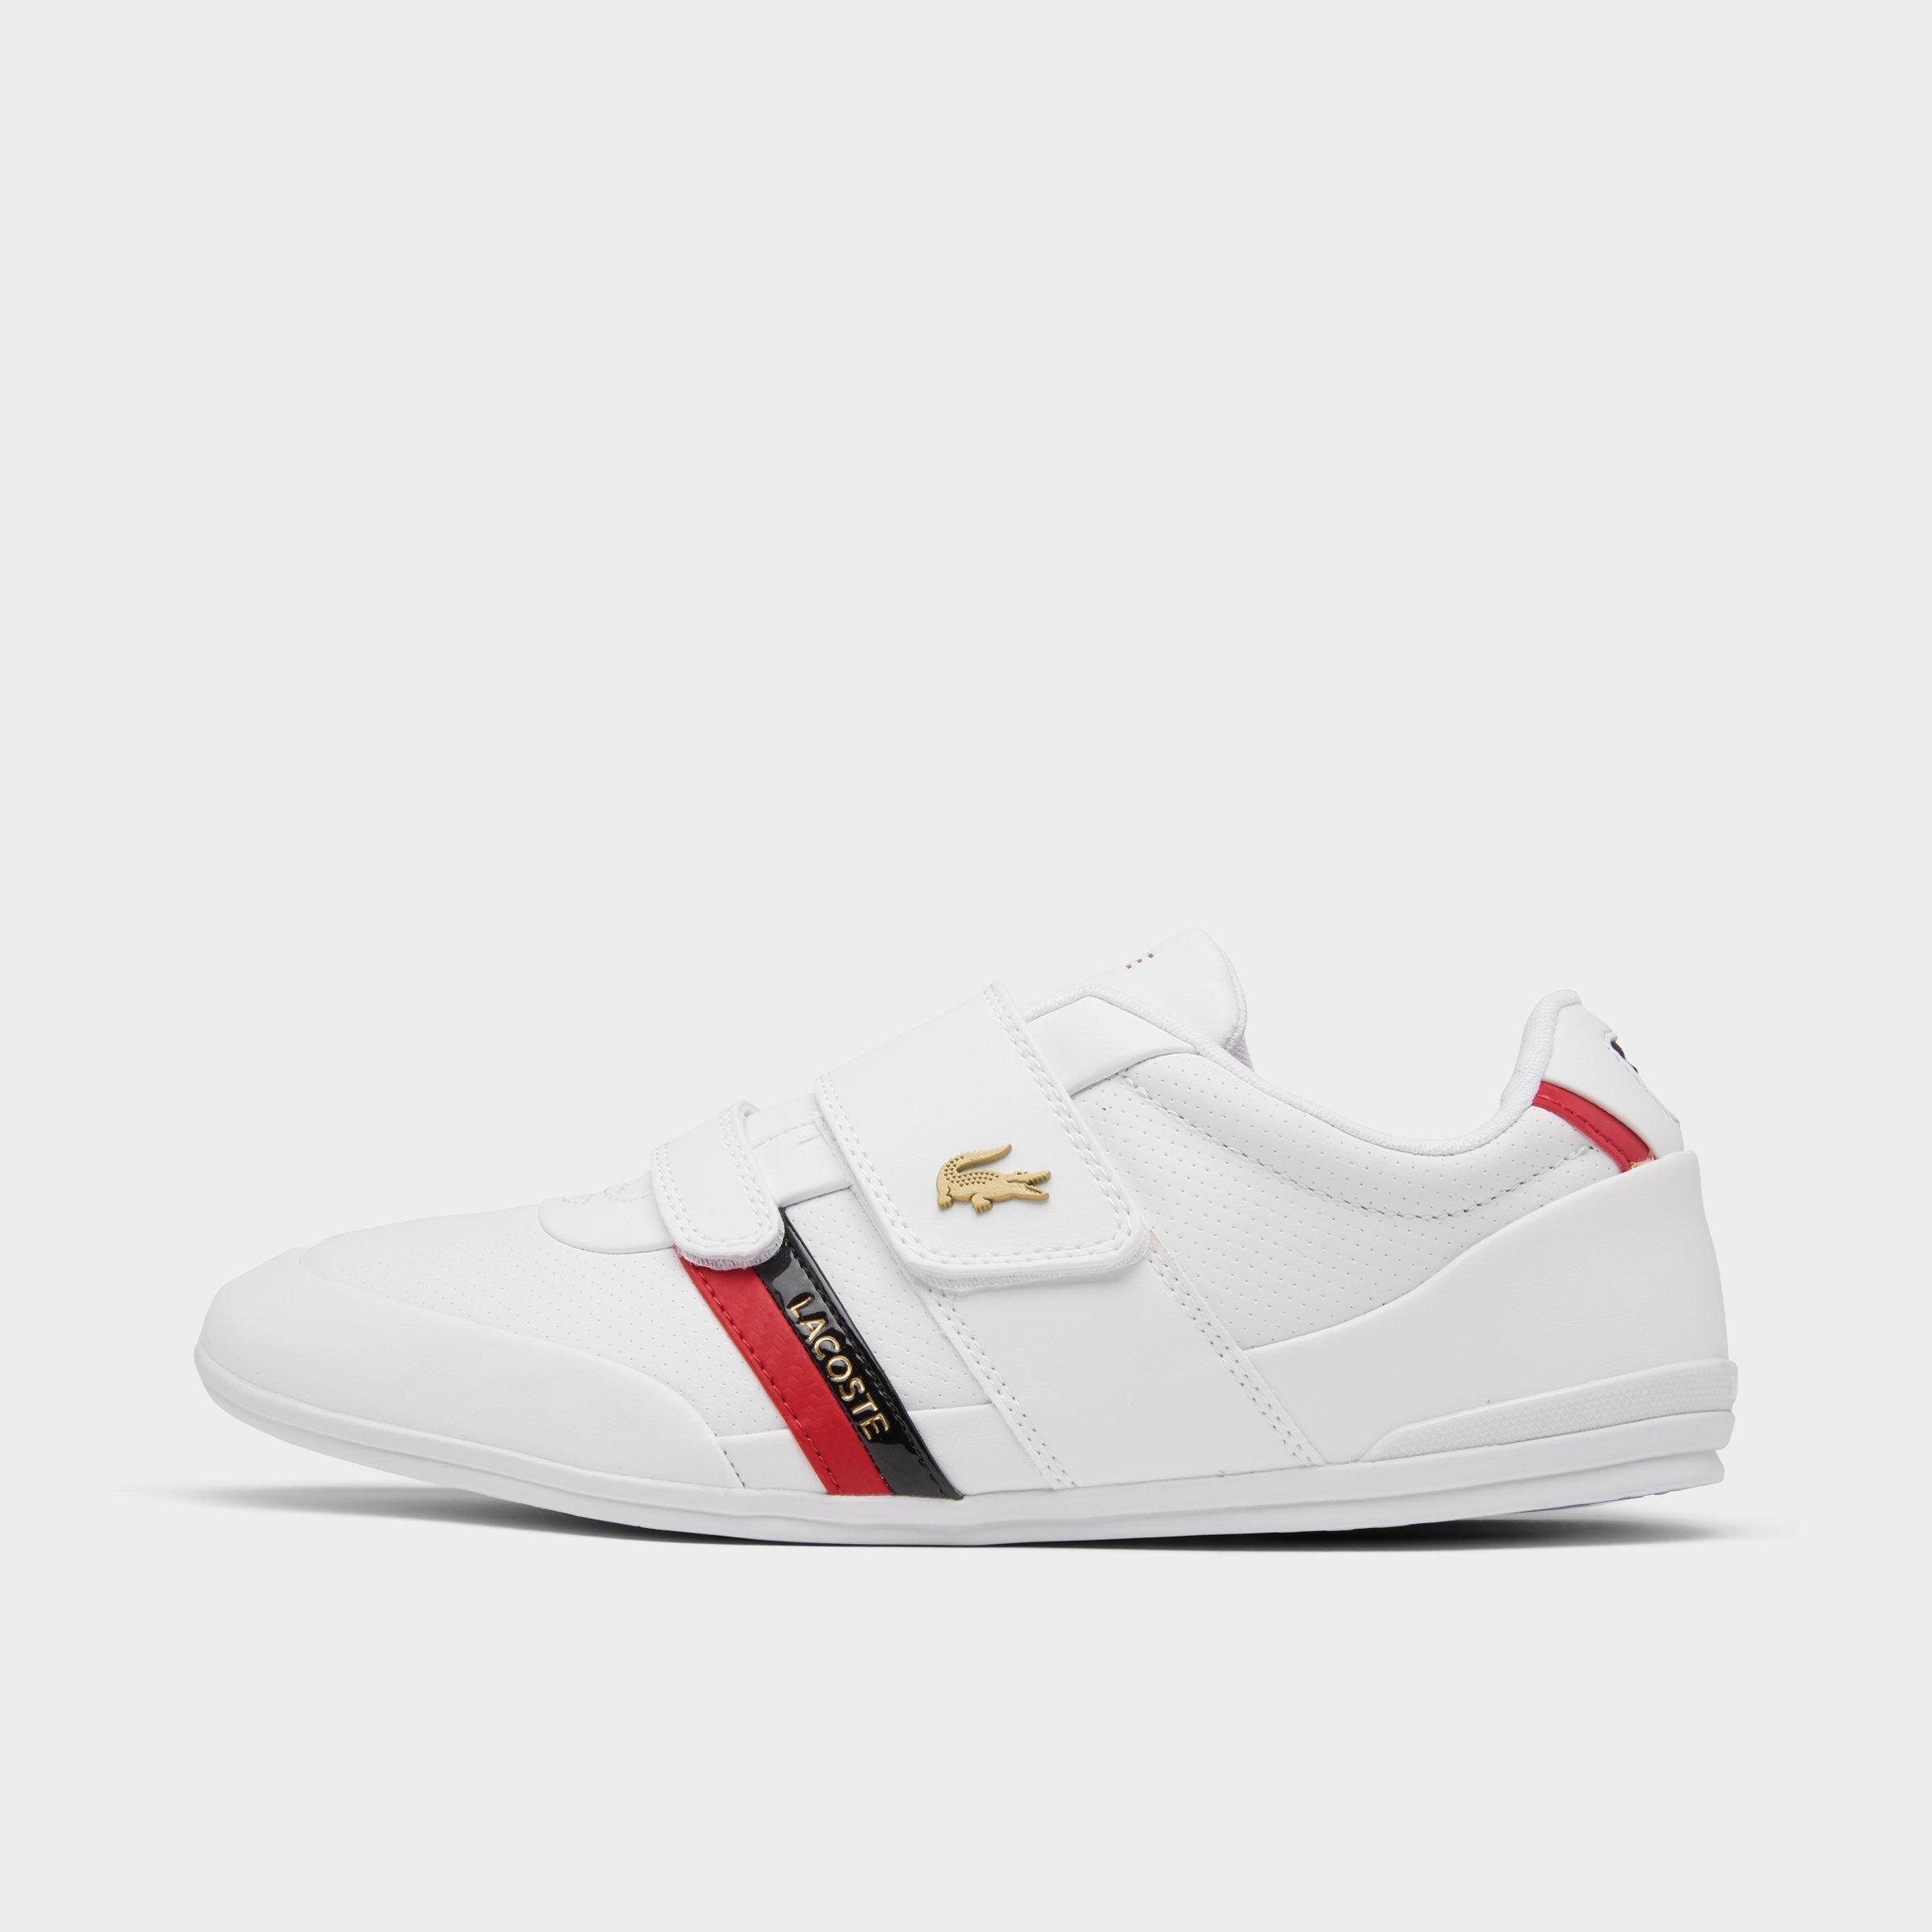 lacoste shoes jd sports